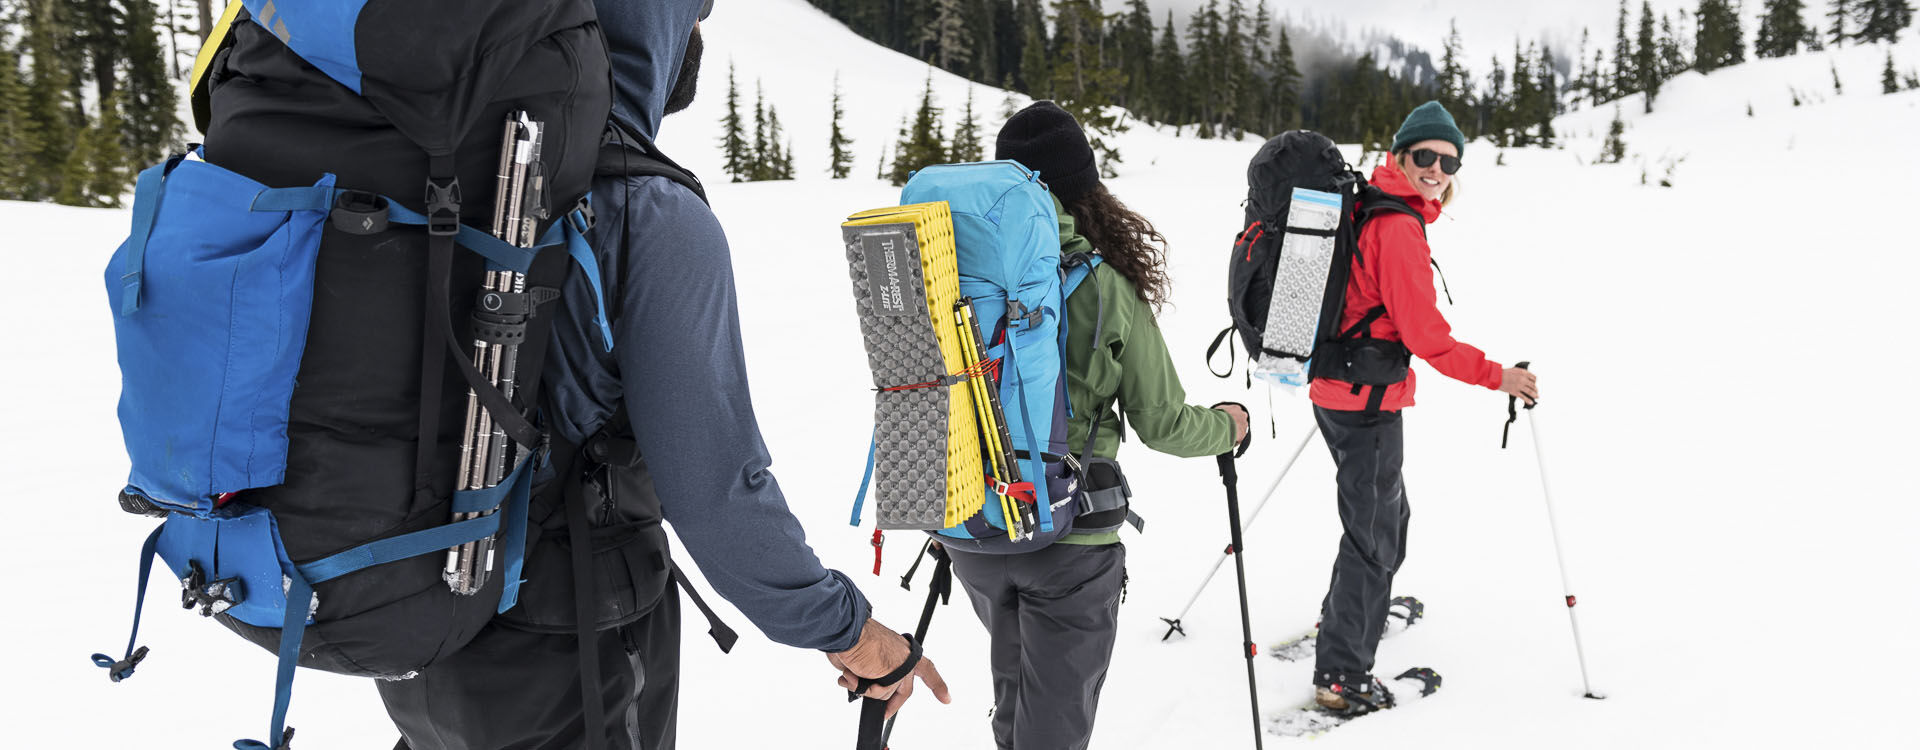 Don't hibernate, Recreate. - Here's the gear that beats the cold weather and keeps you out there.